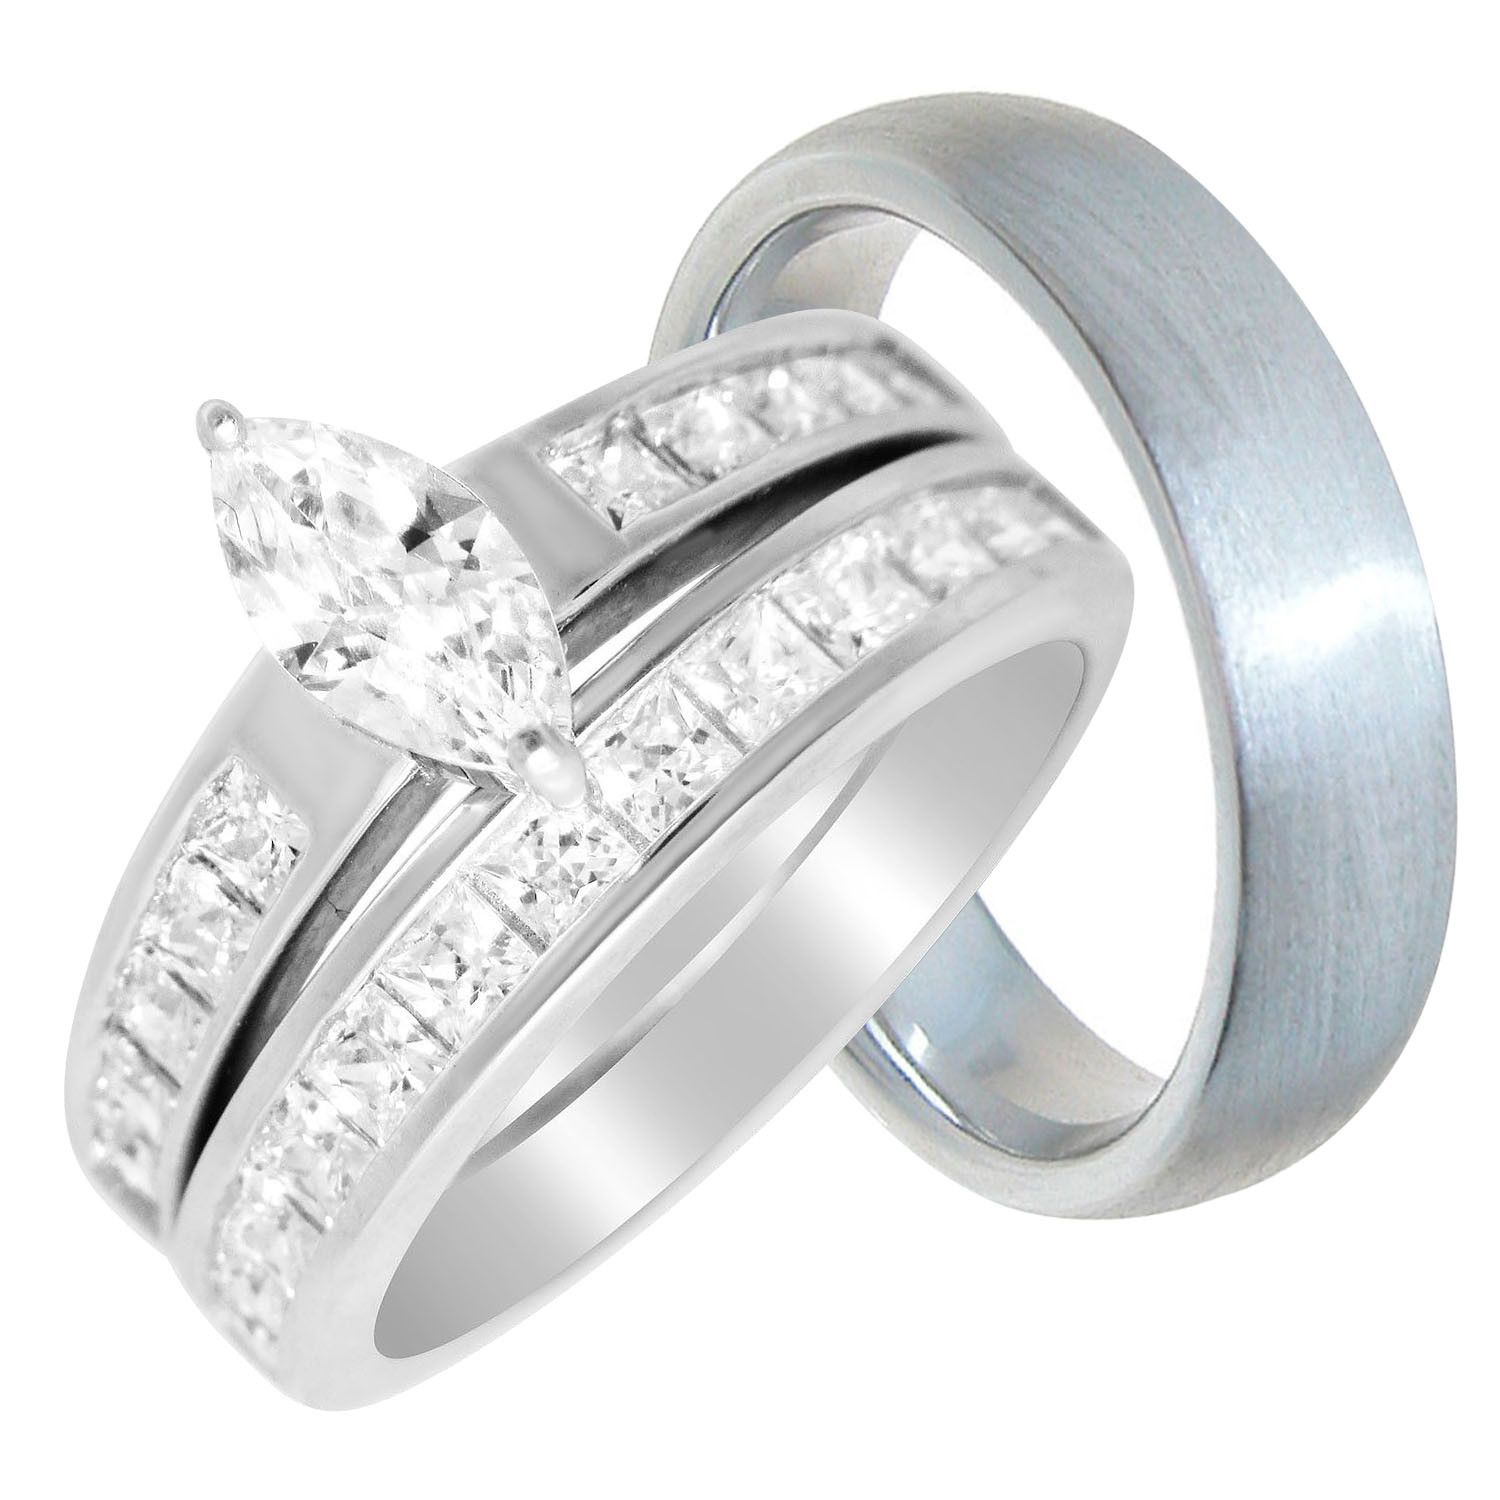 Wedding Ring Sets For Him And Her Cheap
 LaRaso & Co His Hers Wedding Rings Set Cheap Wedding